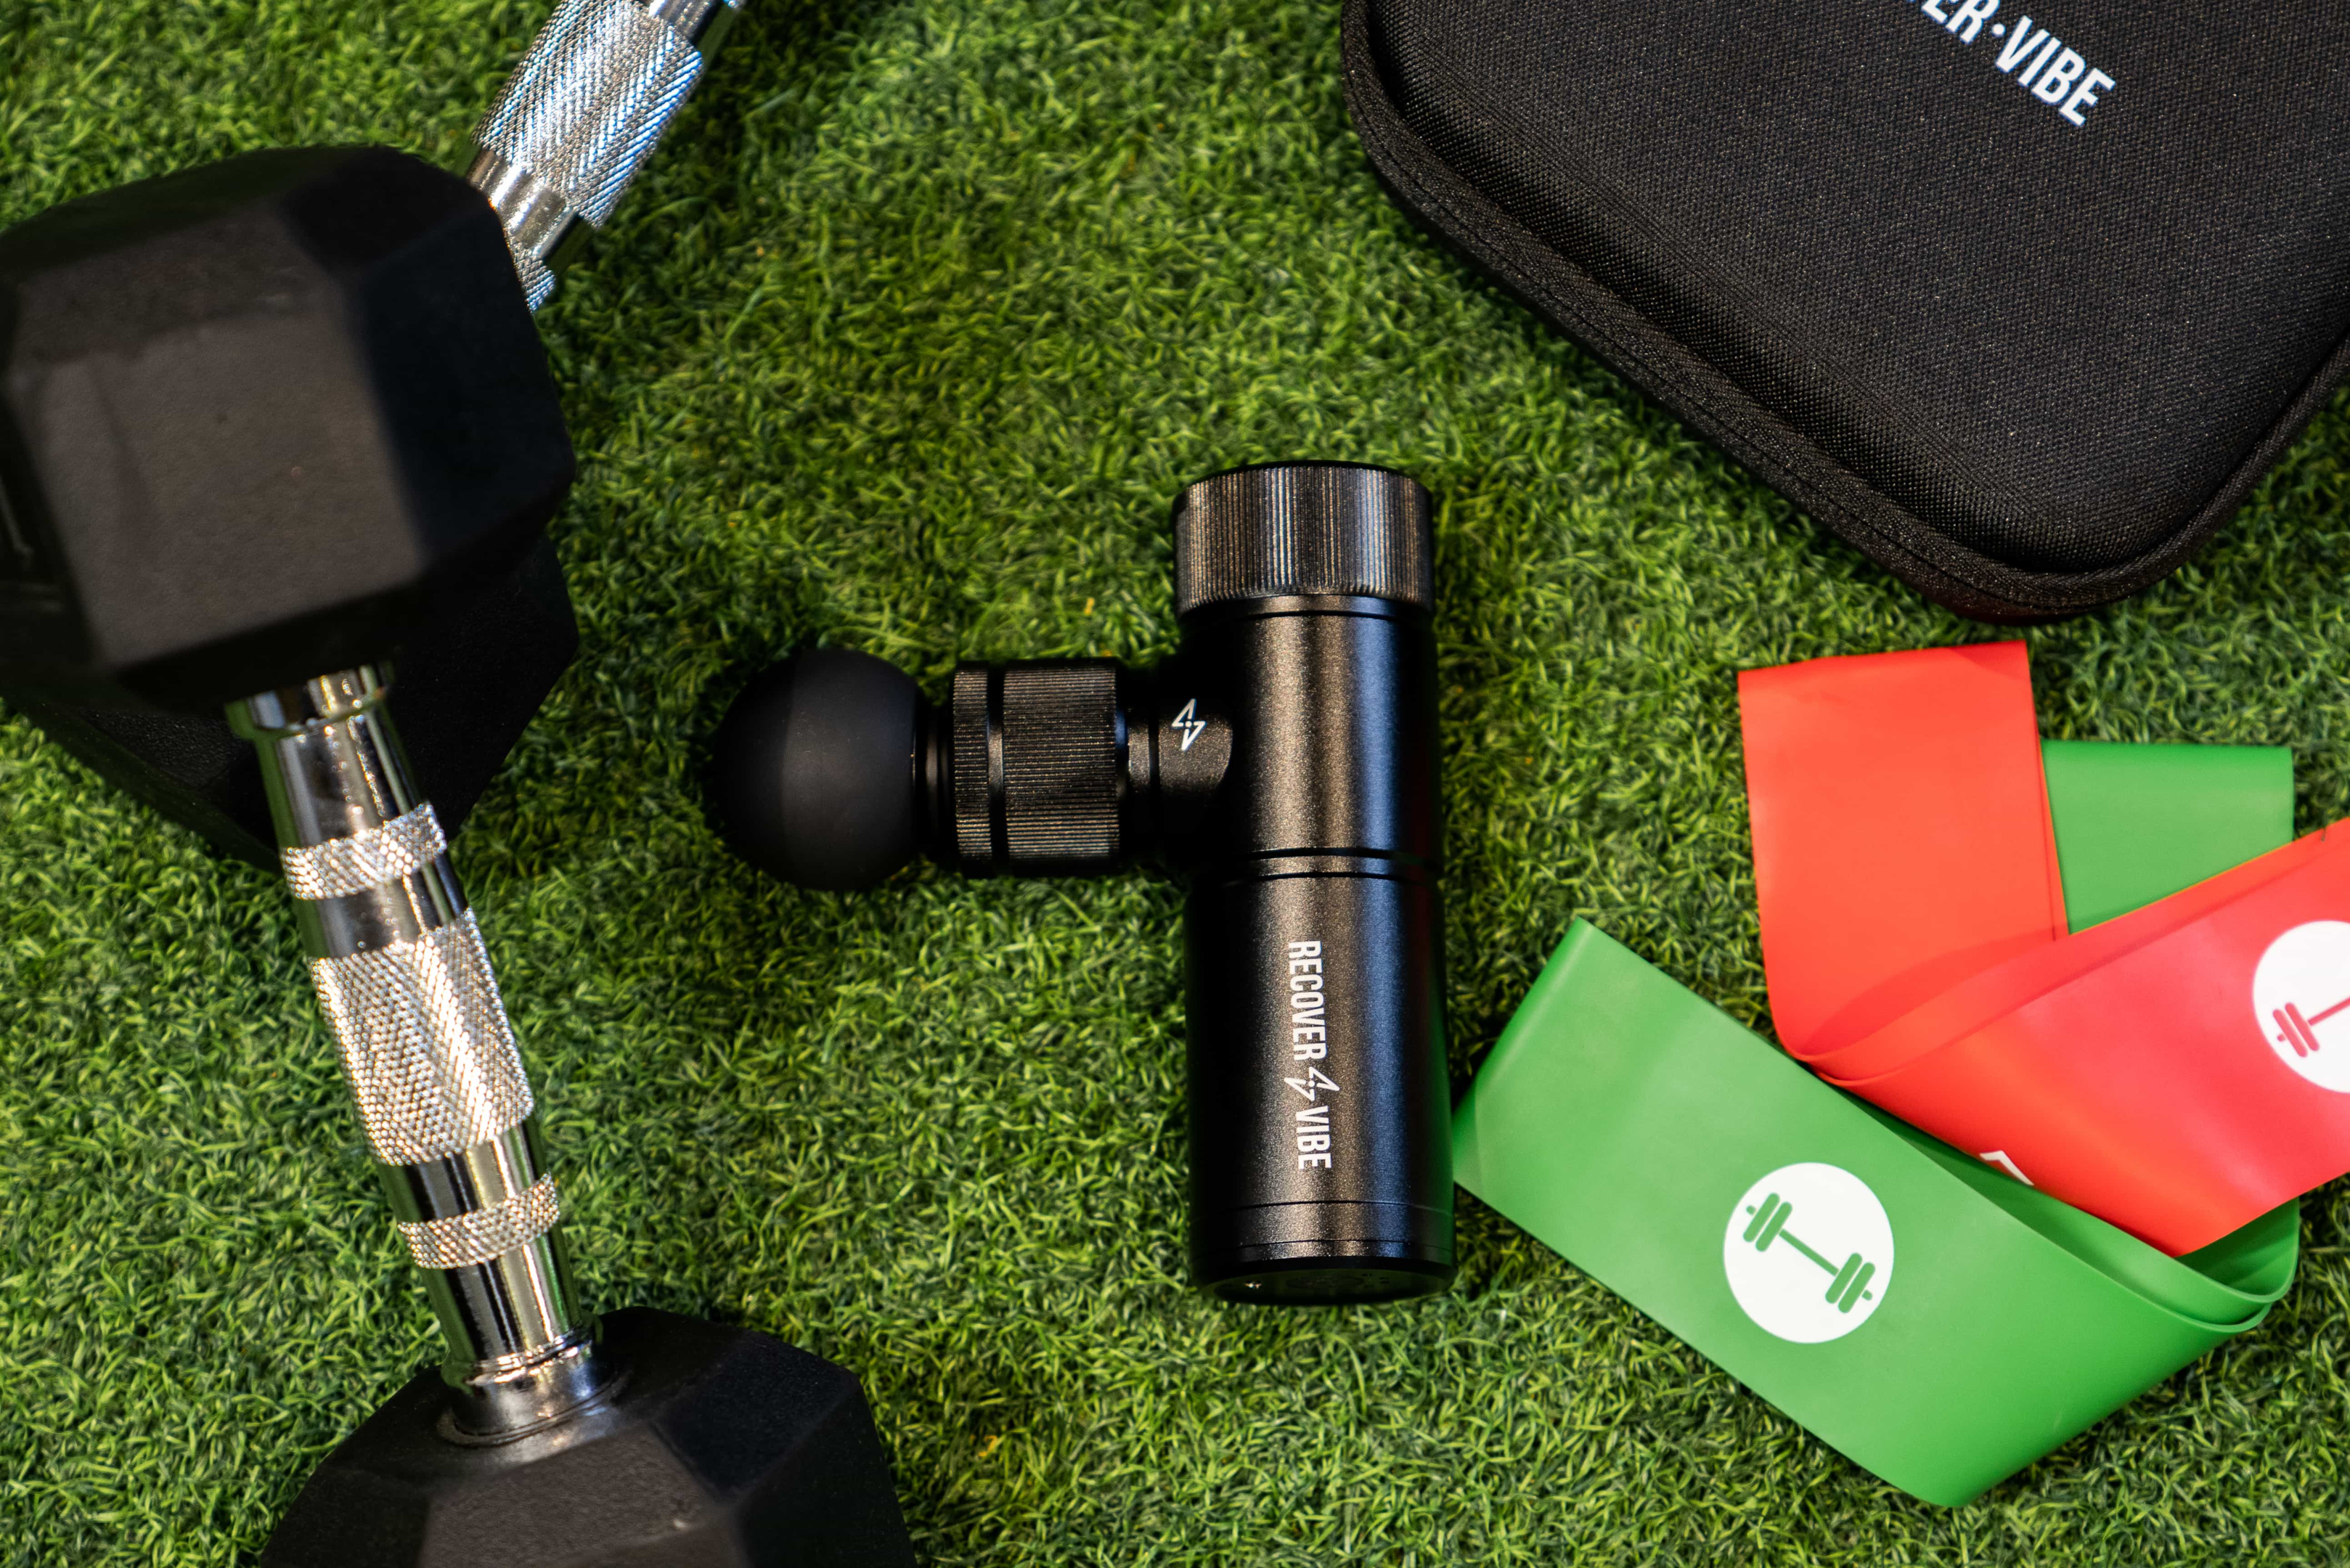 The Recover Vibe Mini massage gun on green turf next to dumbells, and elastic bands